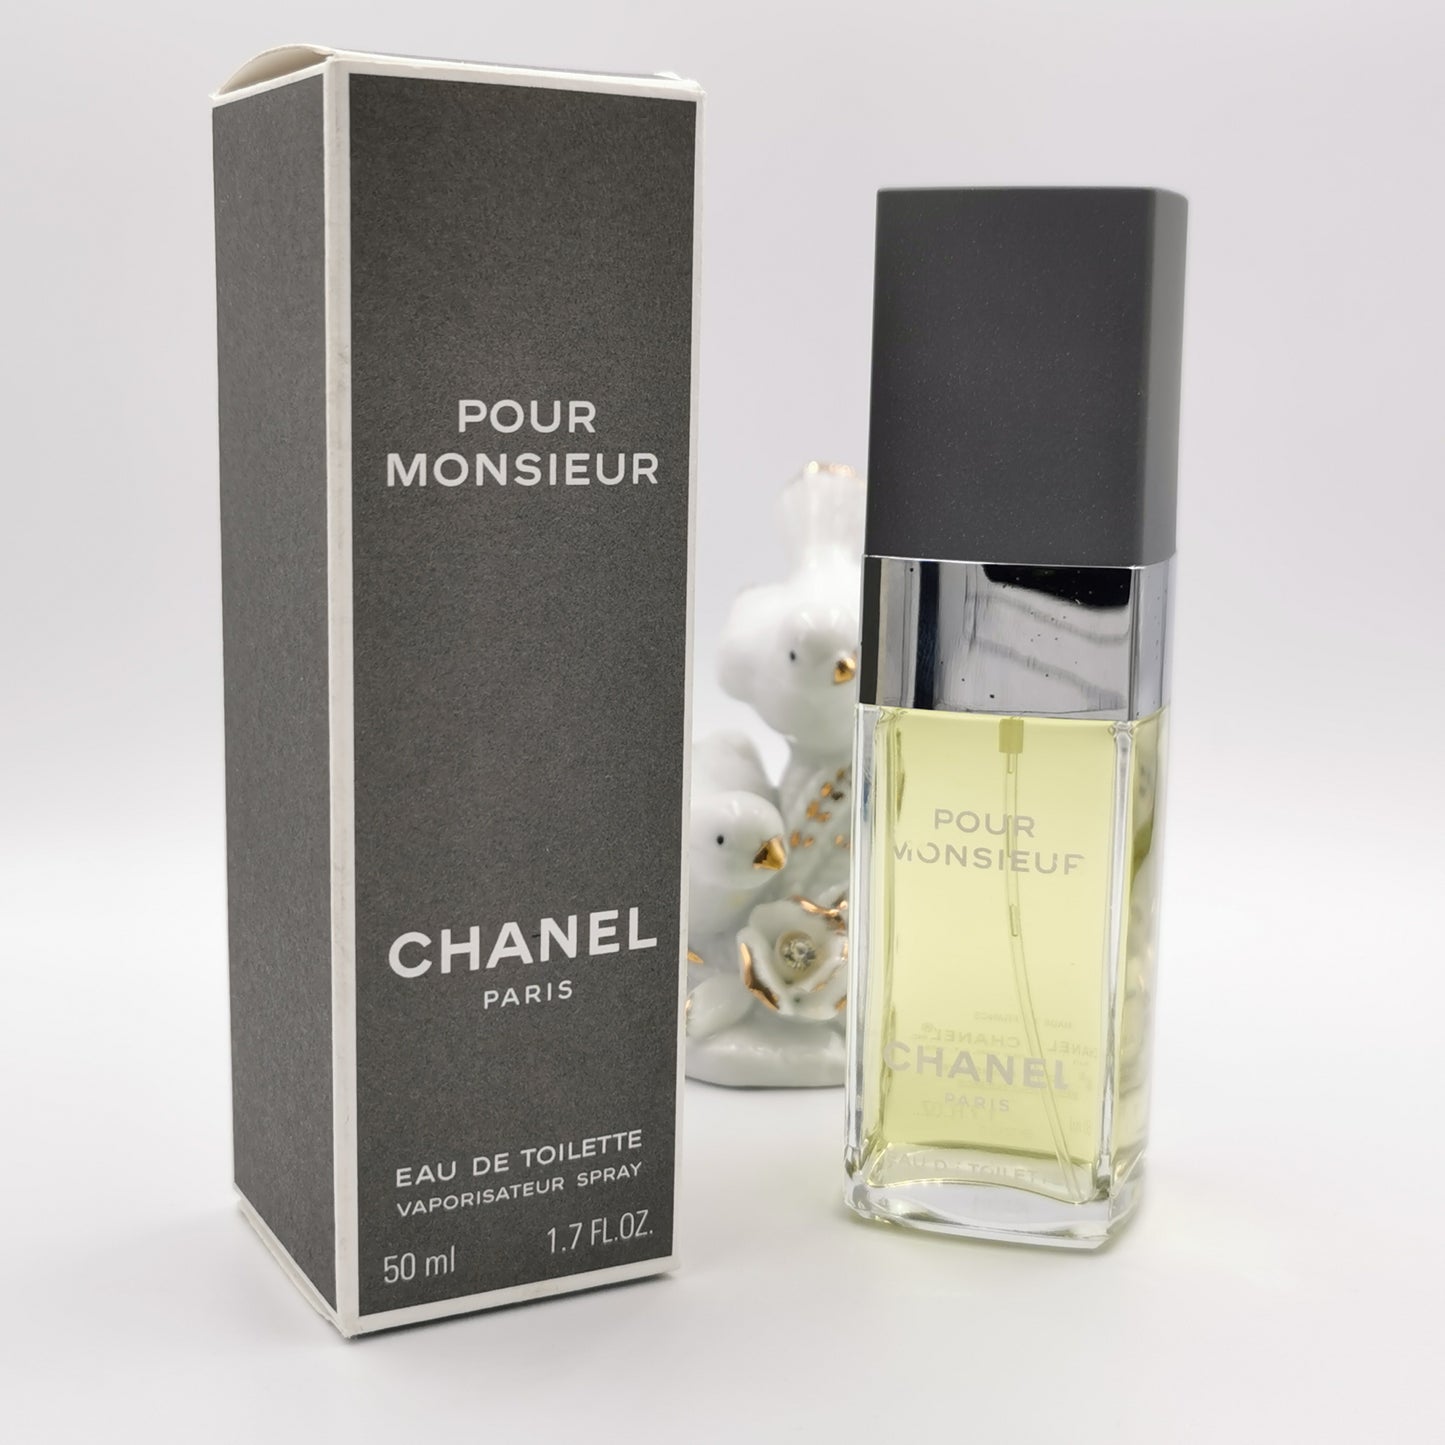 Pour Monsieur by Chanel 50ml EDT Spray RARE